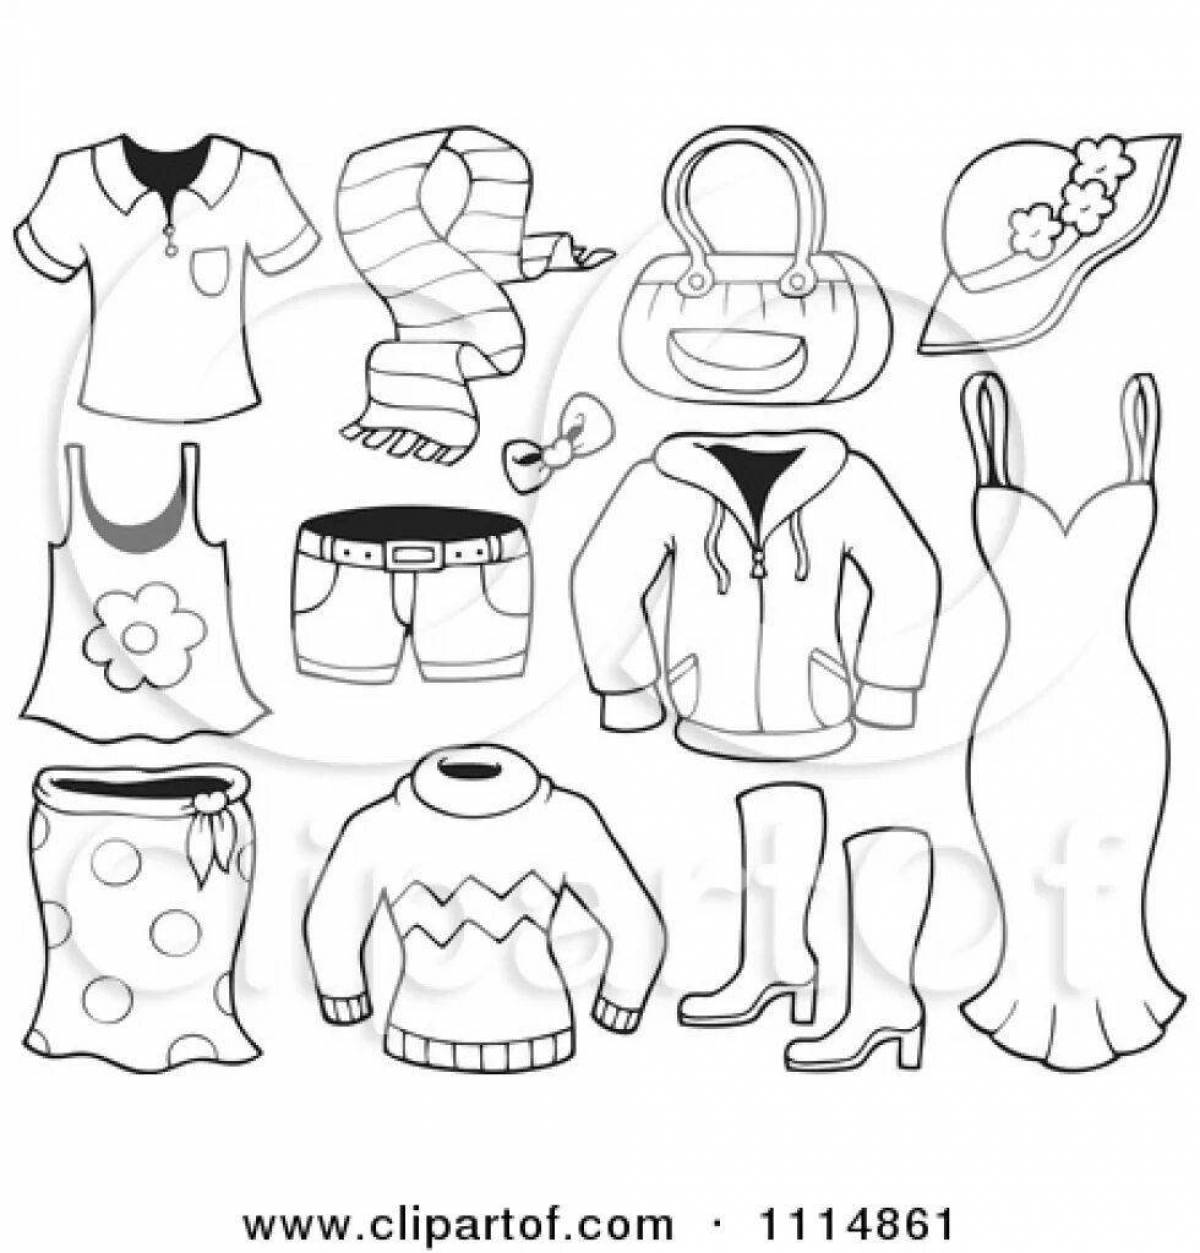 Kinds of clothing for children #6